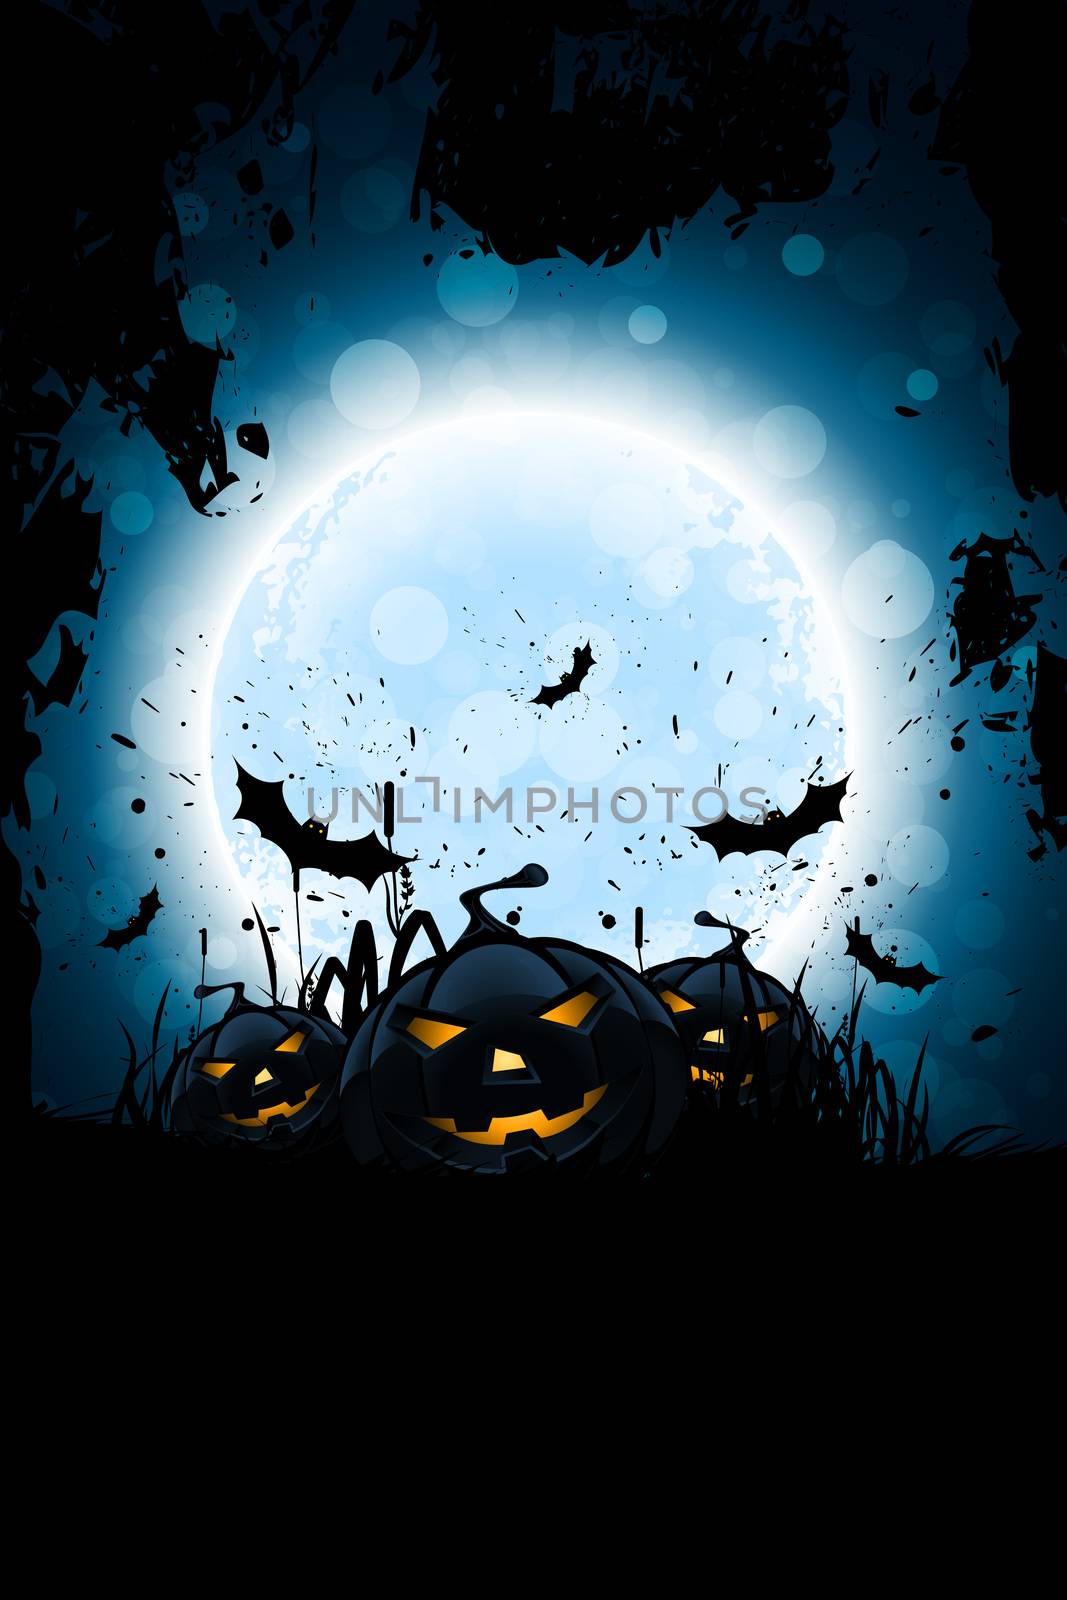 Grunge Halloween Party Background with Pumpkins Grass and Bats